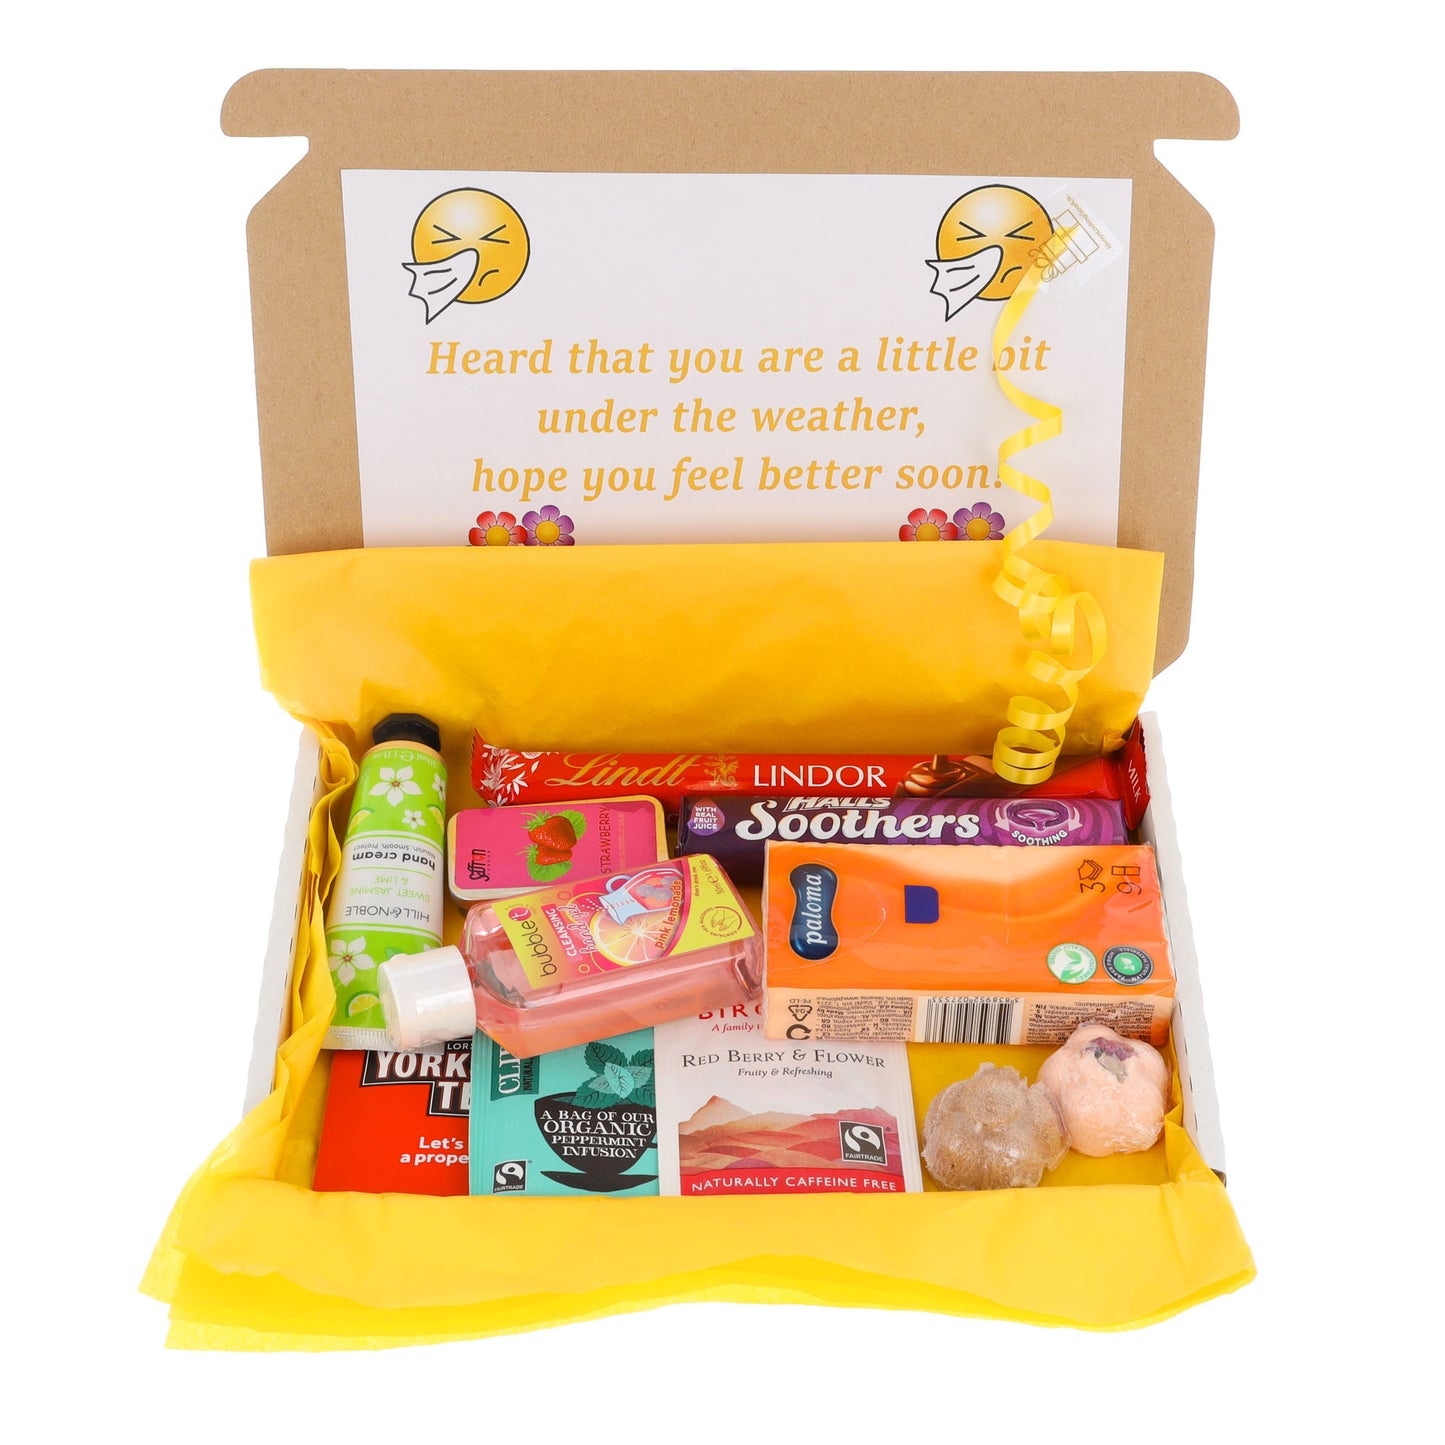 Get Well Soon Care Package Hug in a Box Letterbox Gift Set  - Always Looking Good - Tea  